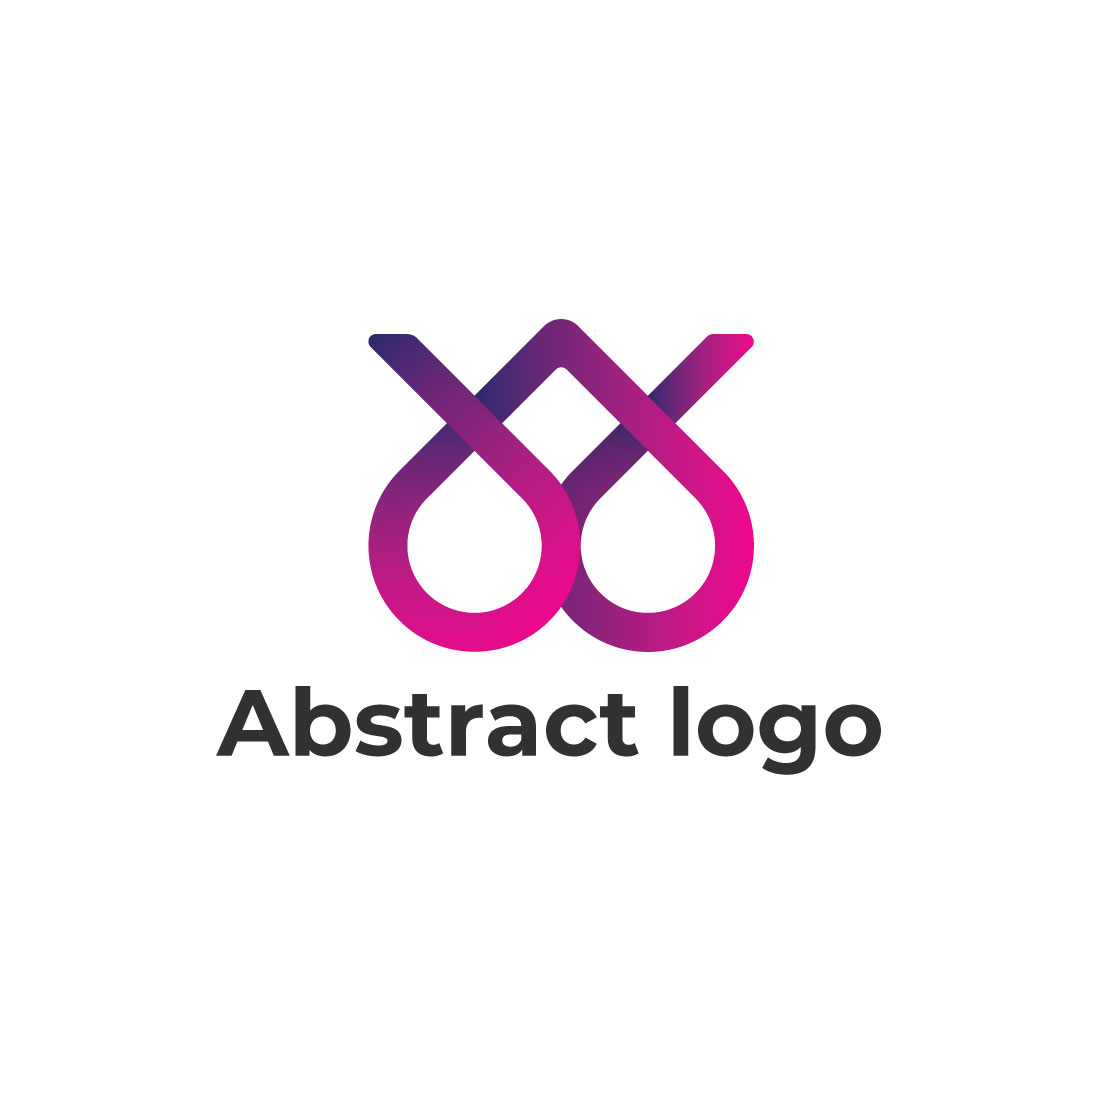 Abstract Logo cover image.